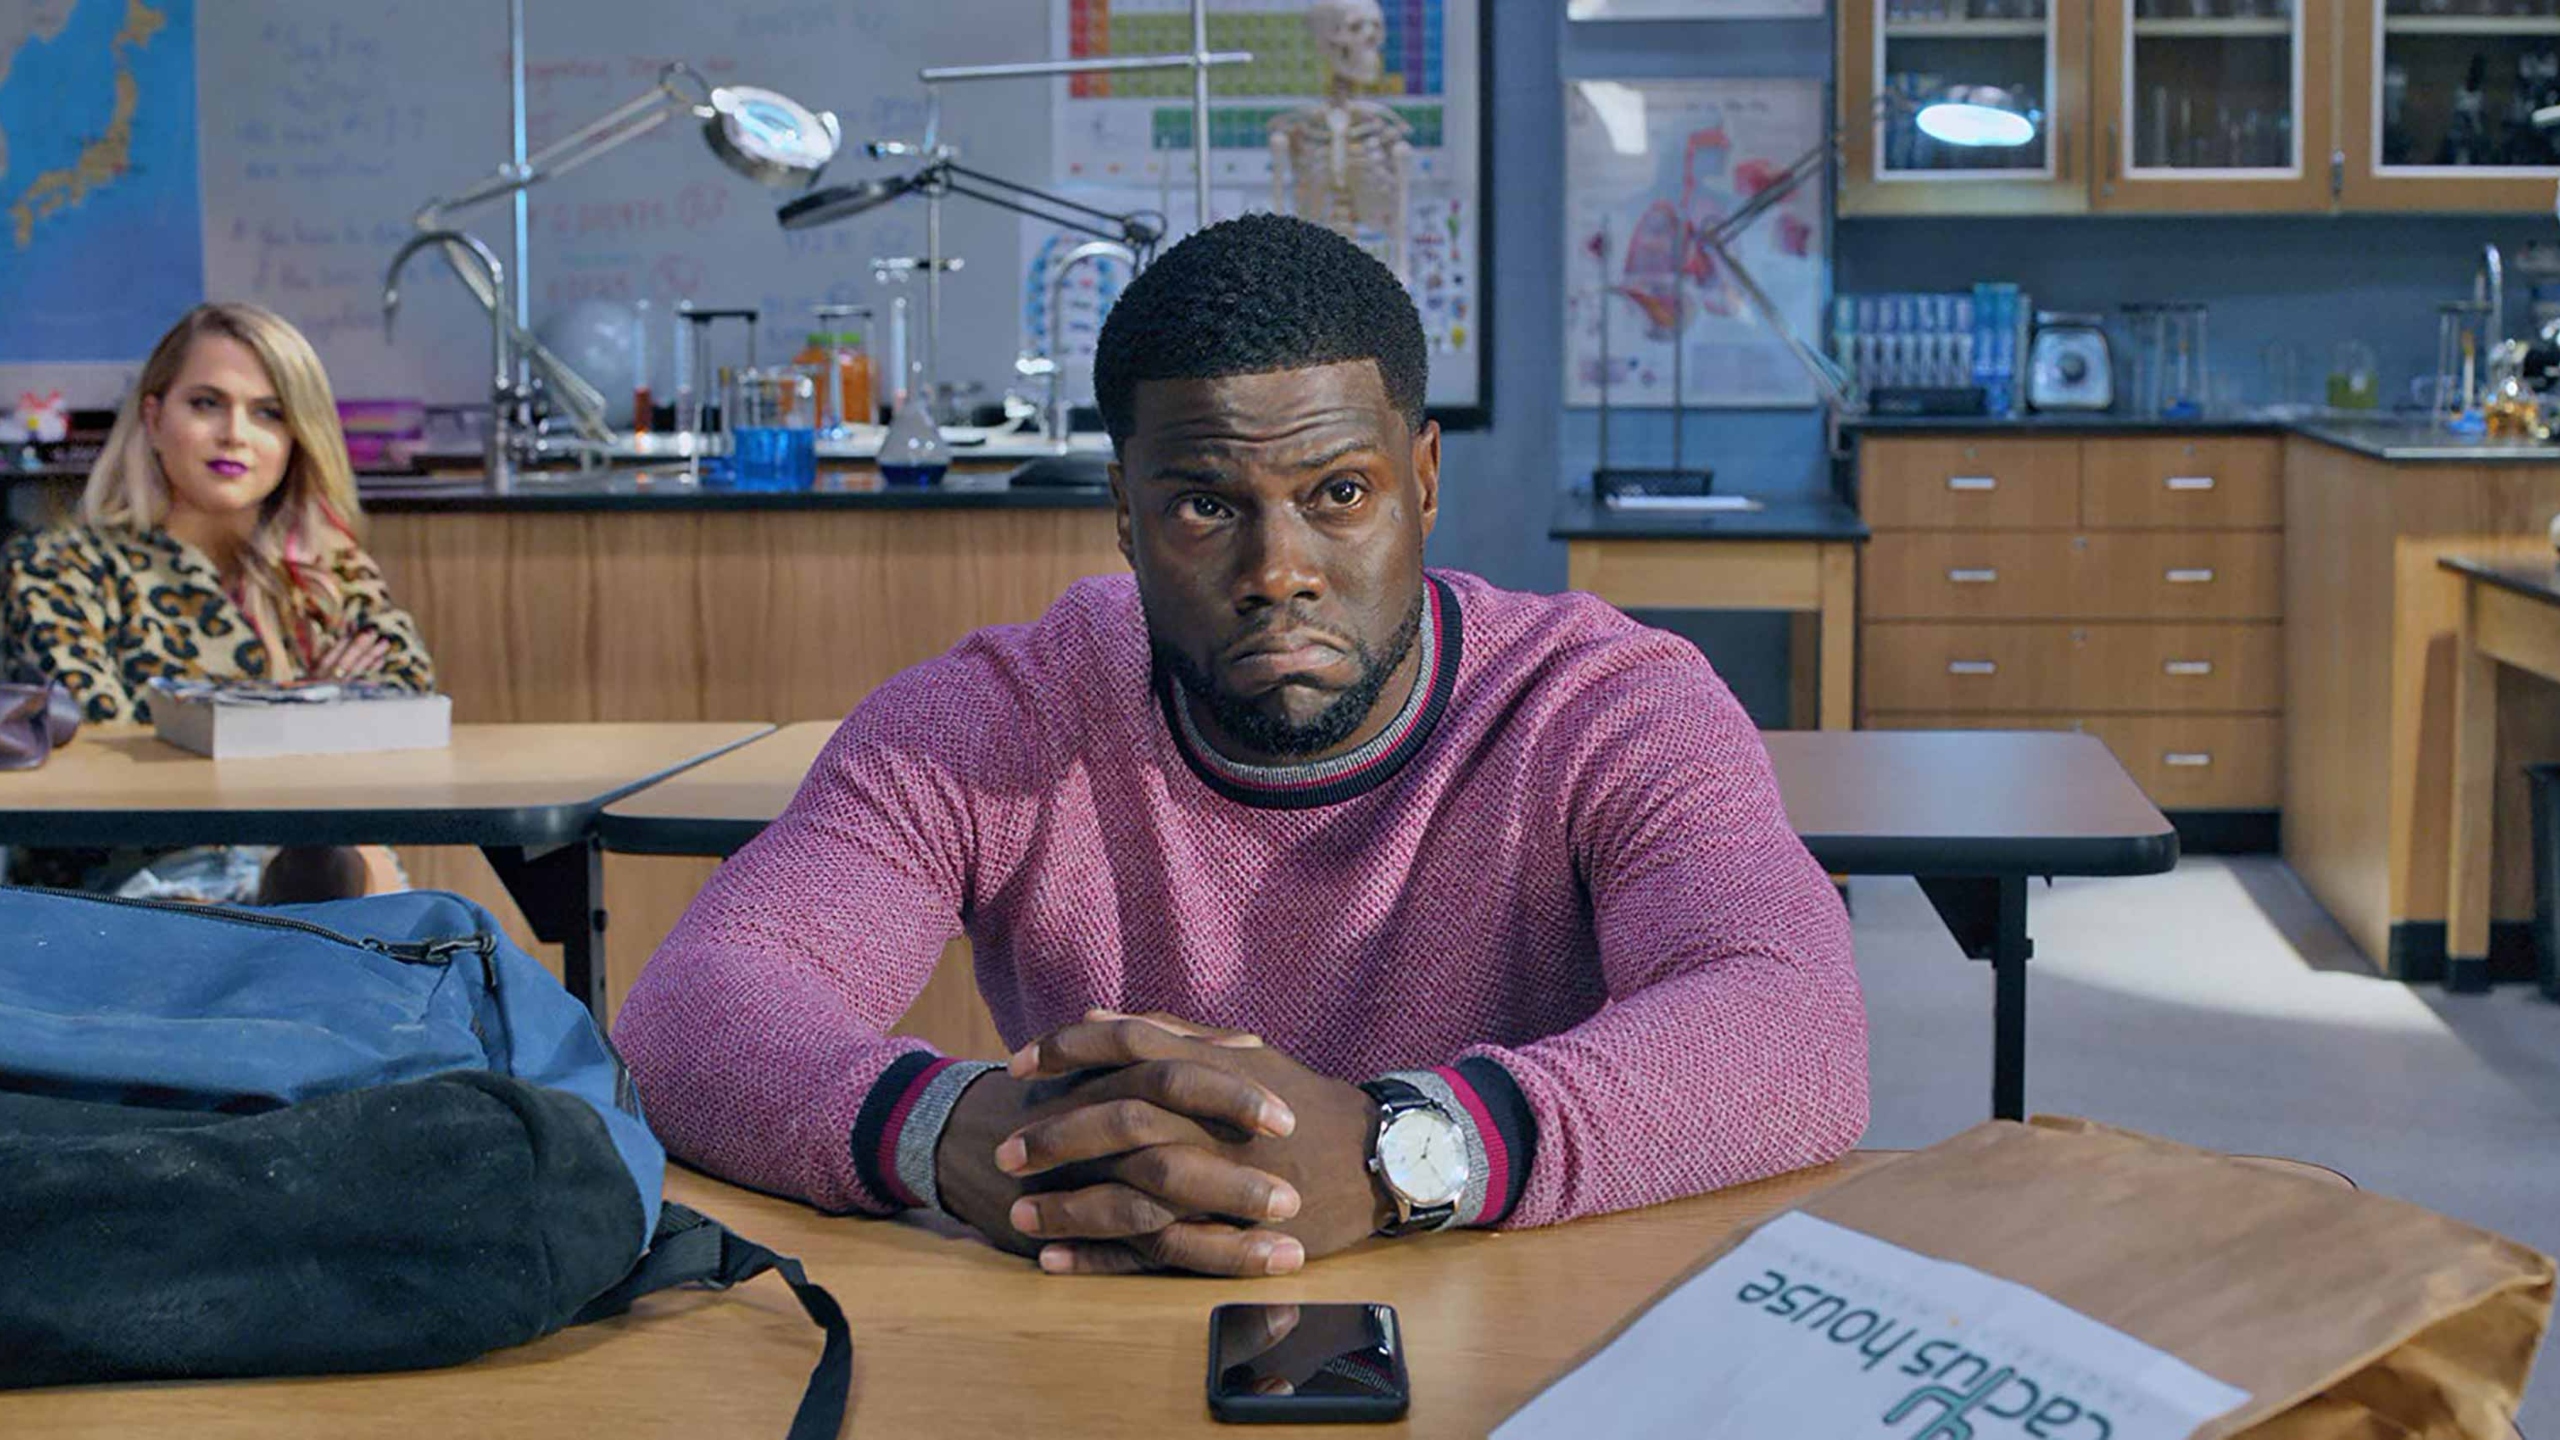 The Man From Toronto, starring Kevin Hart and Woody Harrelson, heads to Netflix